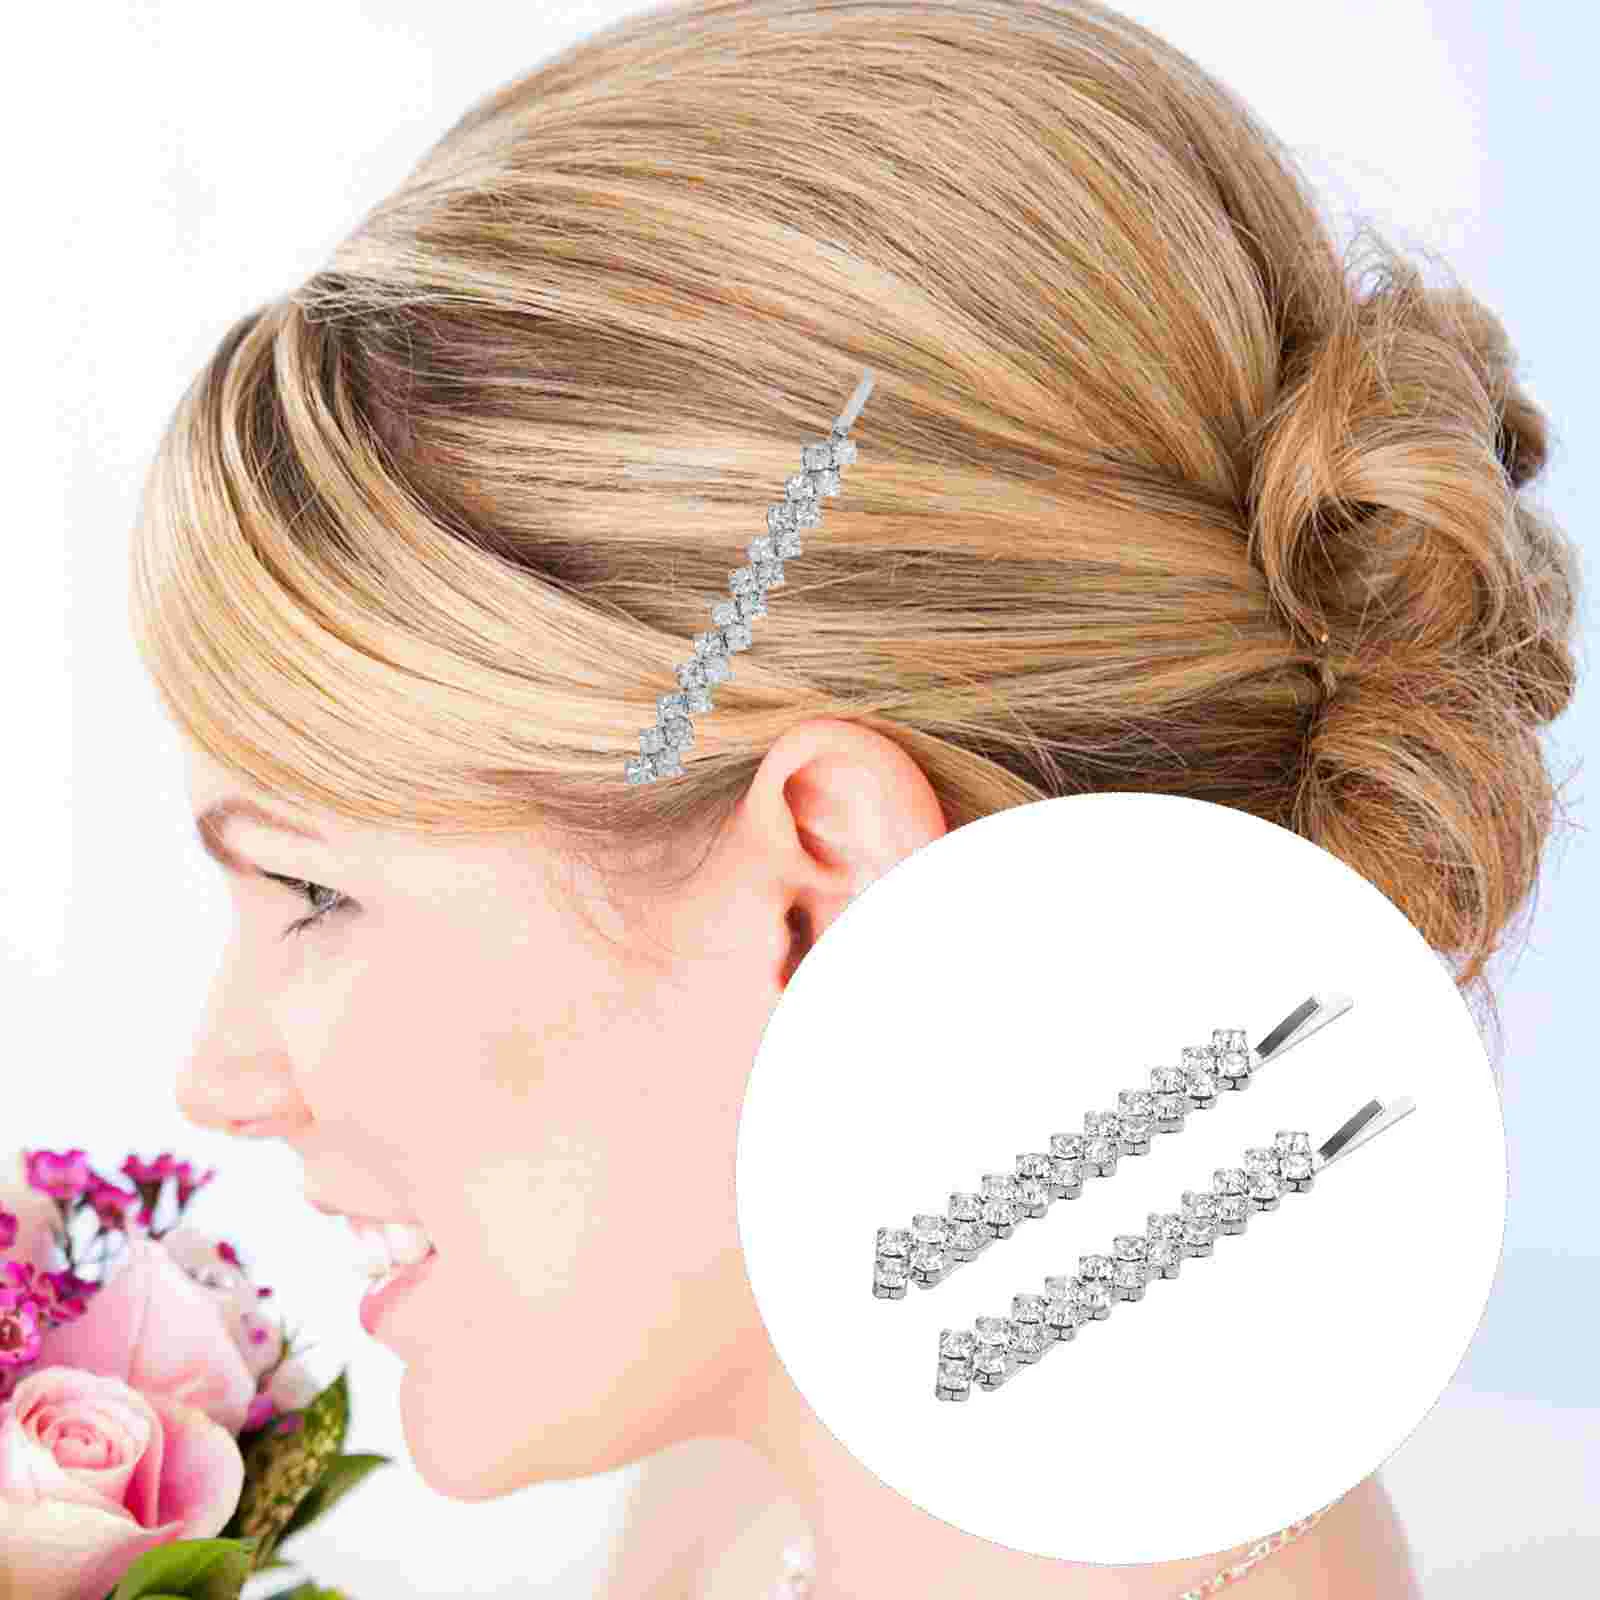 

Crystal Hairpin Clip Metal Hairpins Woman Bobby Stylish Rhinestone Accessories for Teen Girls